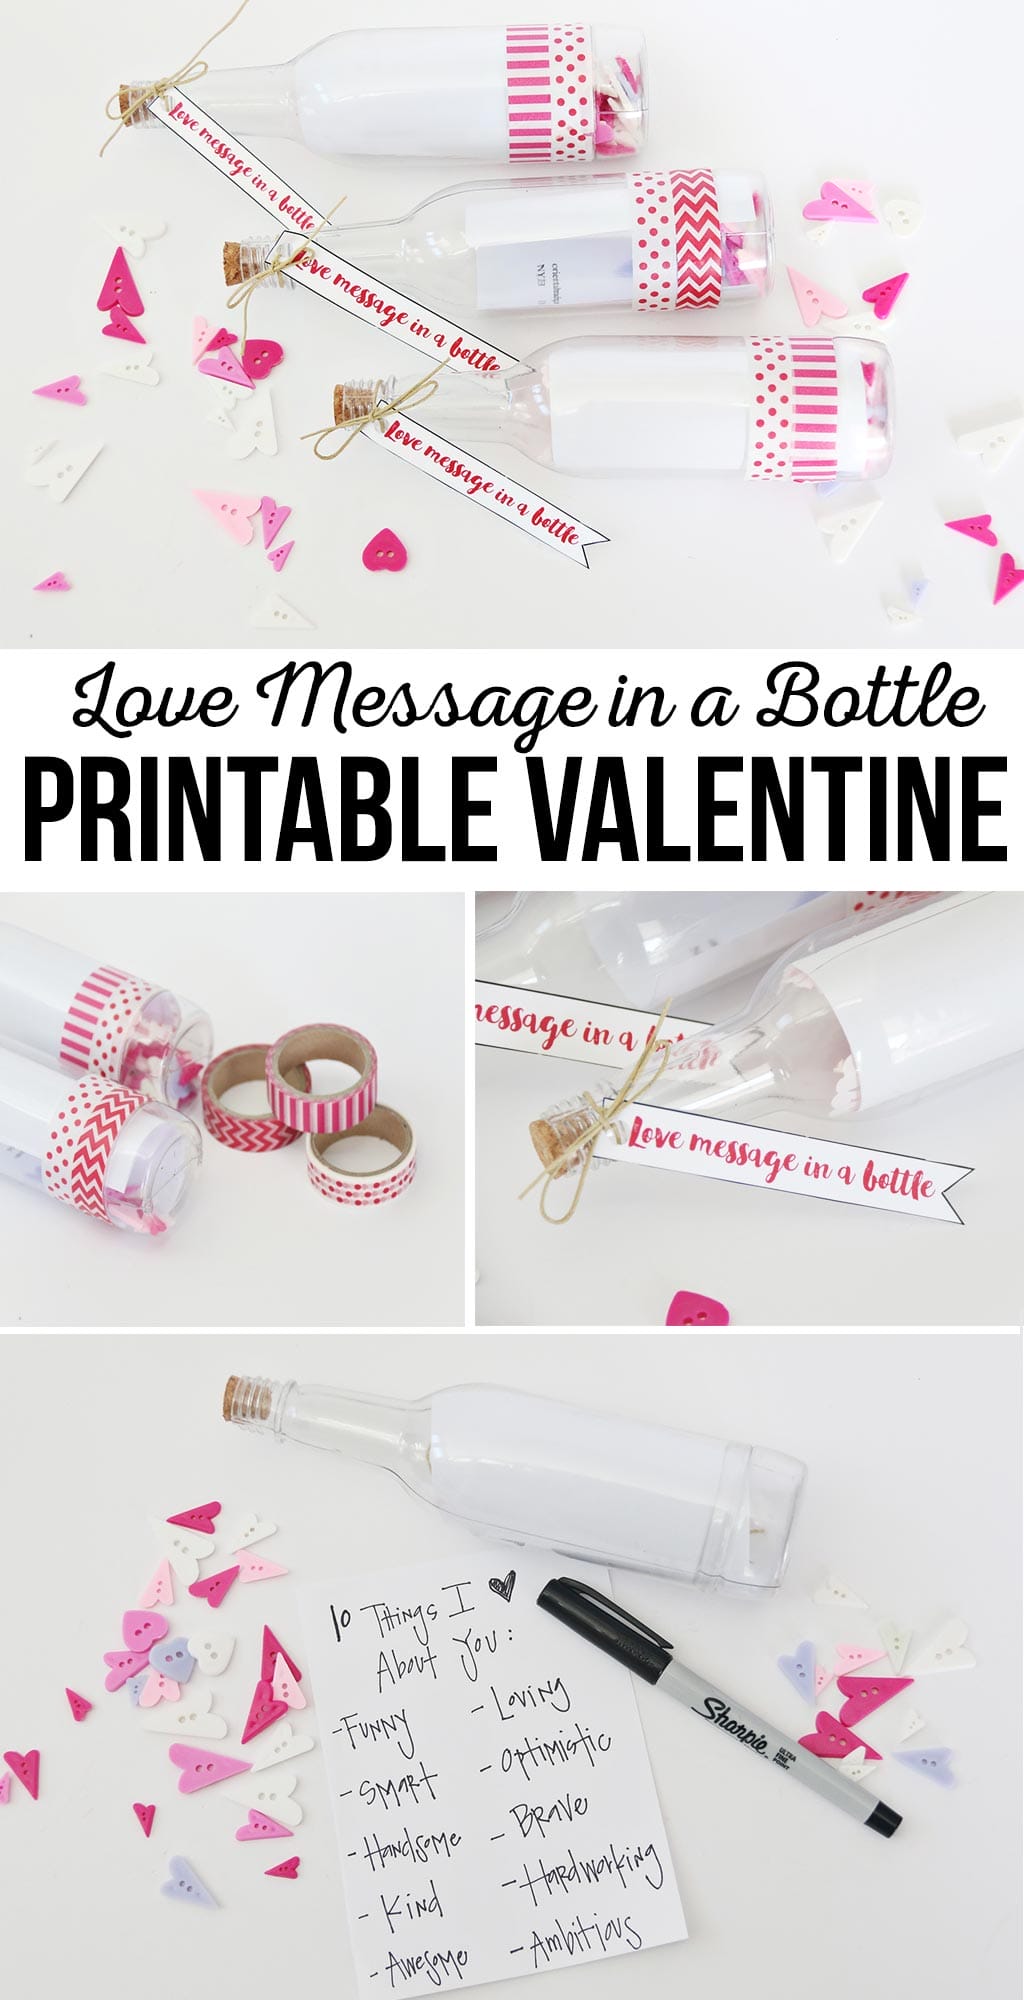 Love Message in a Bottle Printable Valentine